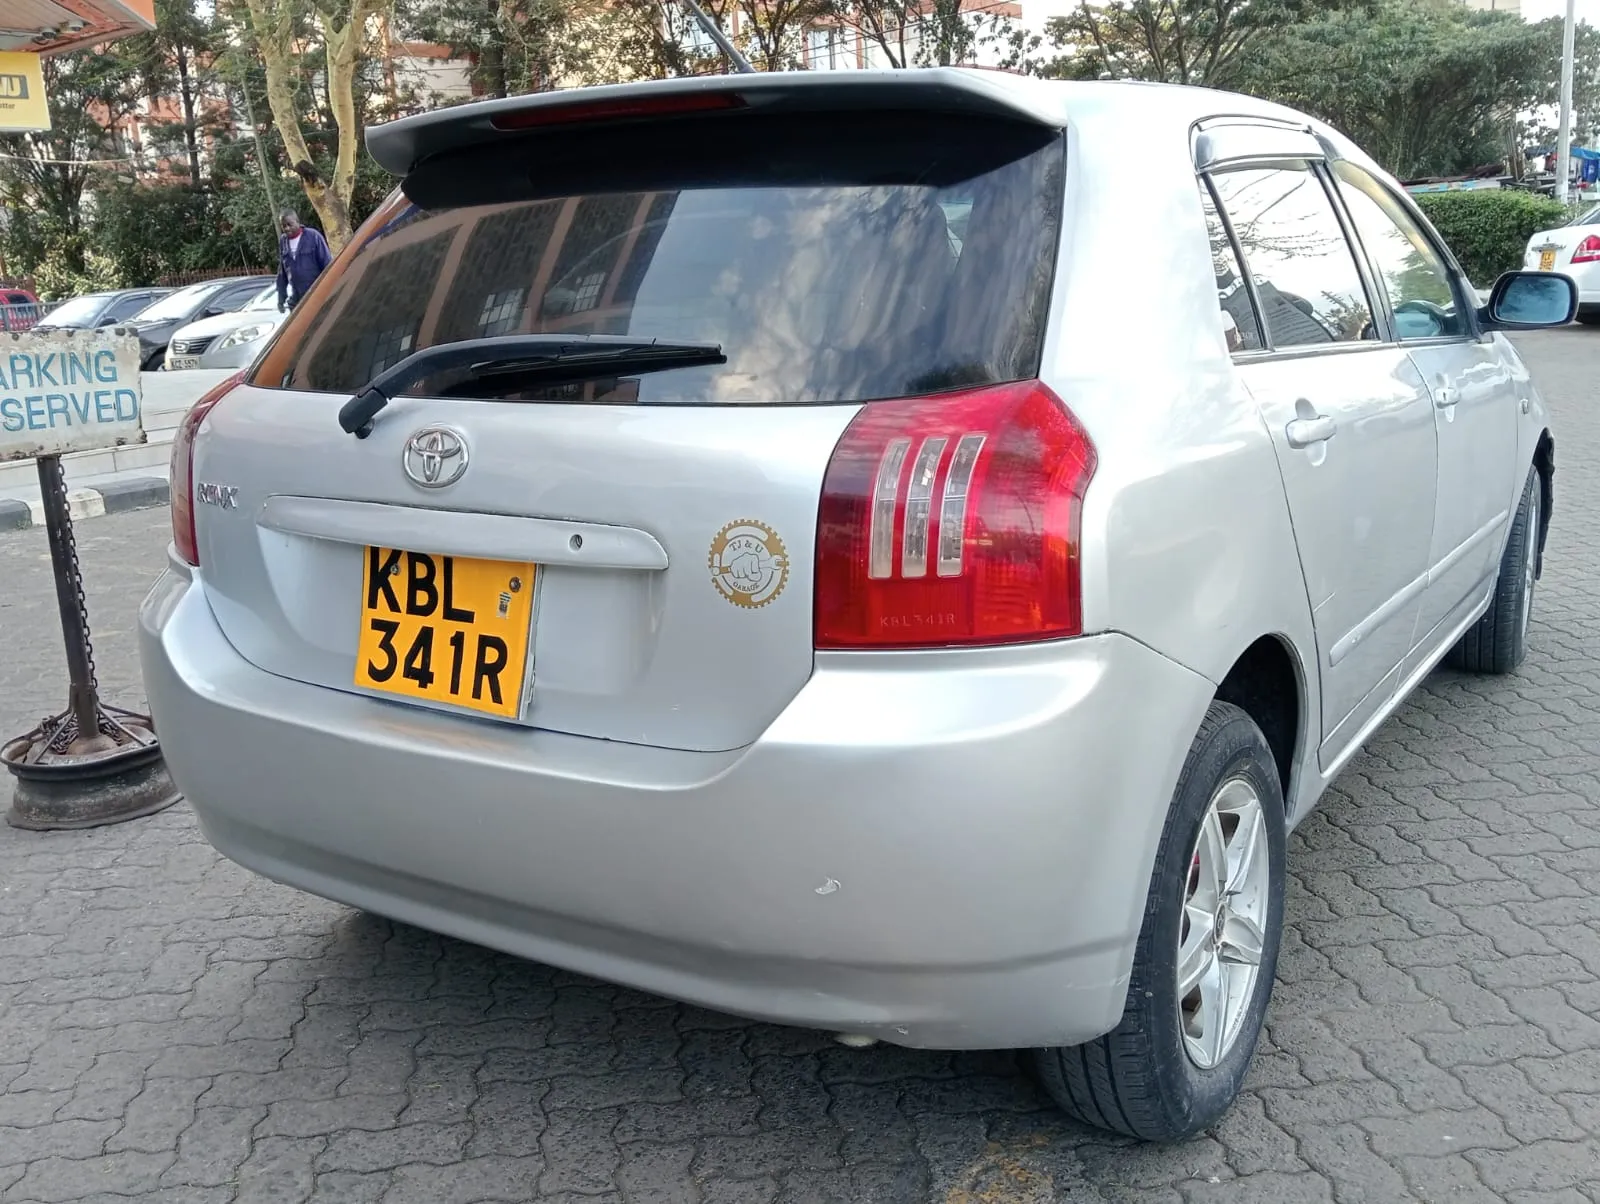 toyota RUNX Allex for sale as new hire purchase installments